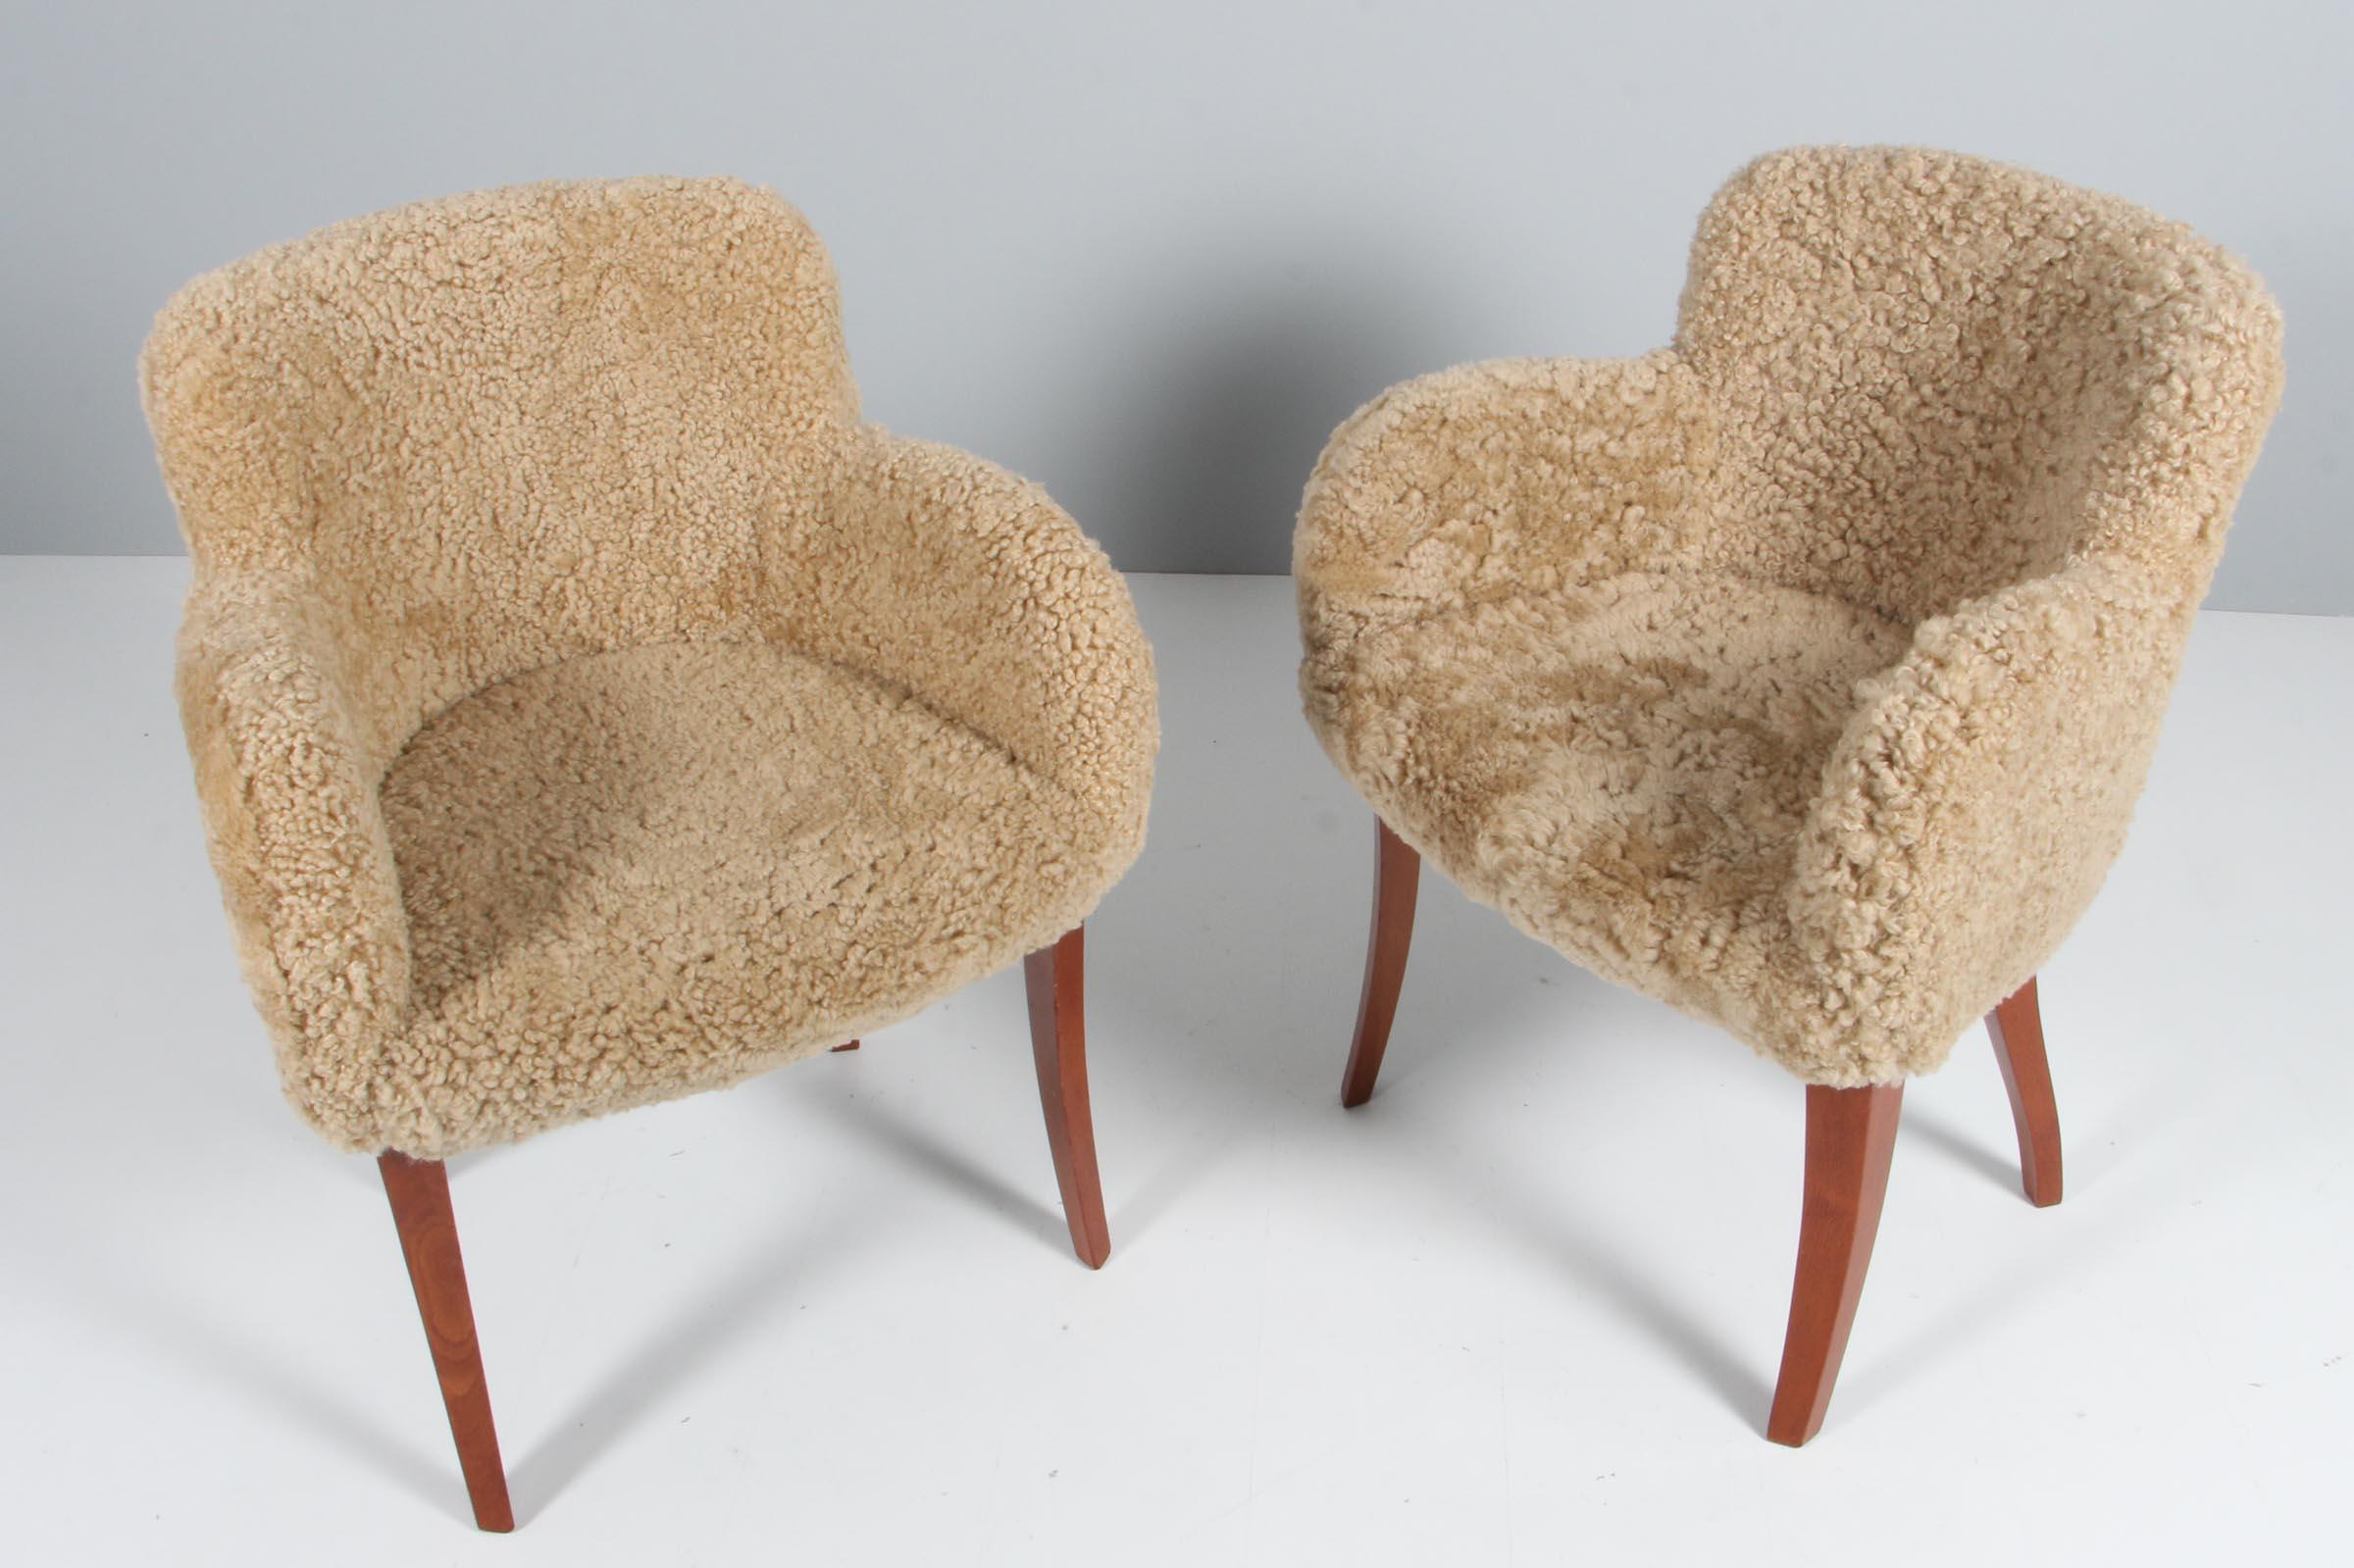 Pair of chairs from the 1940s new upholstered with lambskin.

Curvy legs made of solid mahogany.